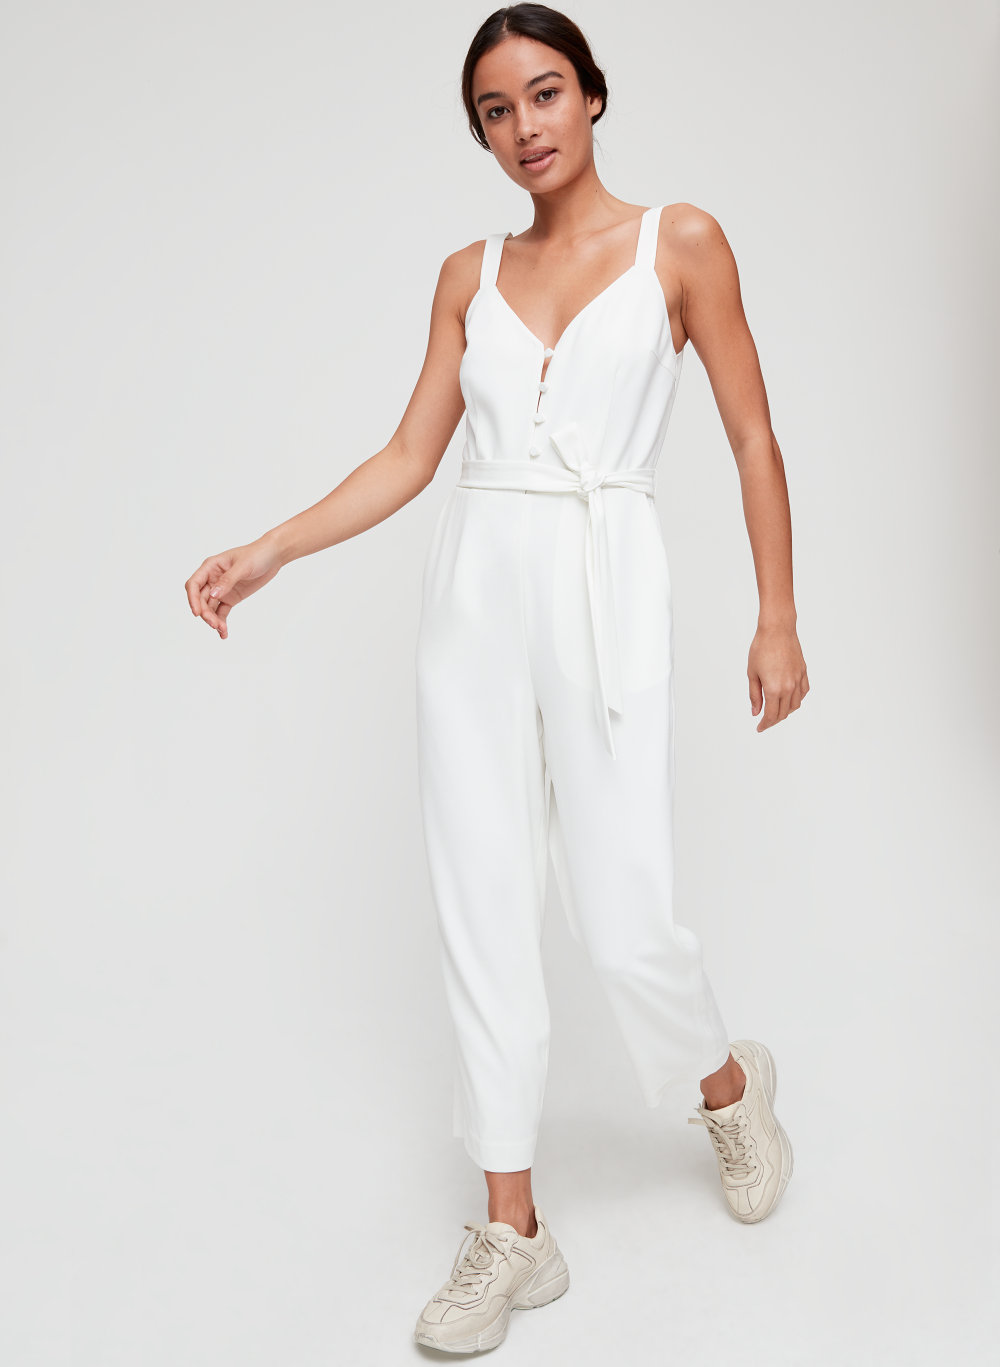 white tight fitted jumpsuit